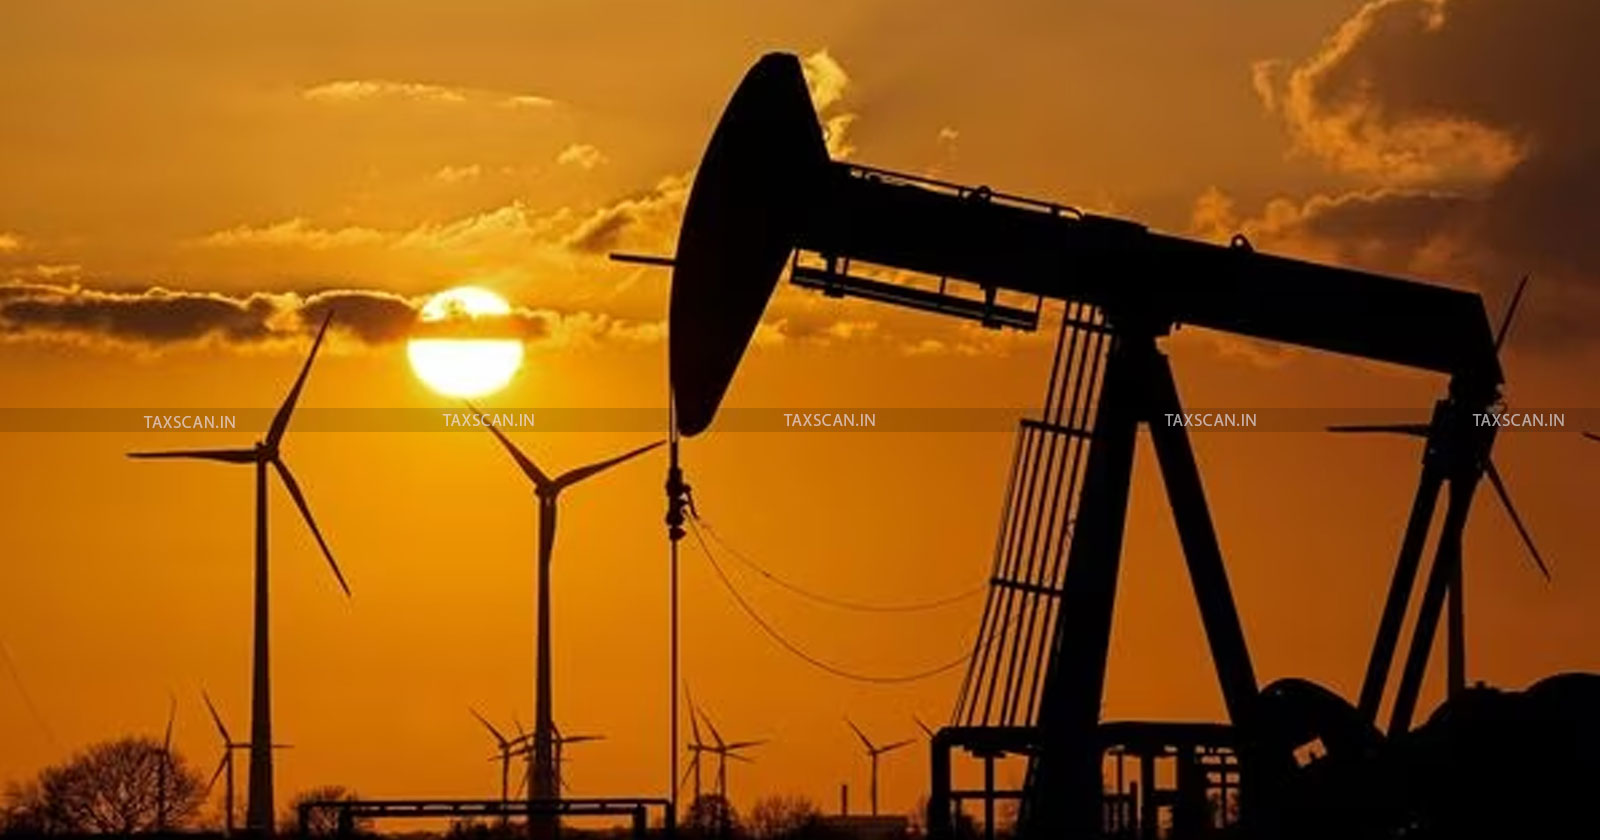 Windfall tax - Petroleum crude tax - Government tax policy - Energy taxation - Oil industry - taxscan